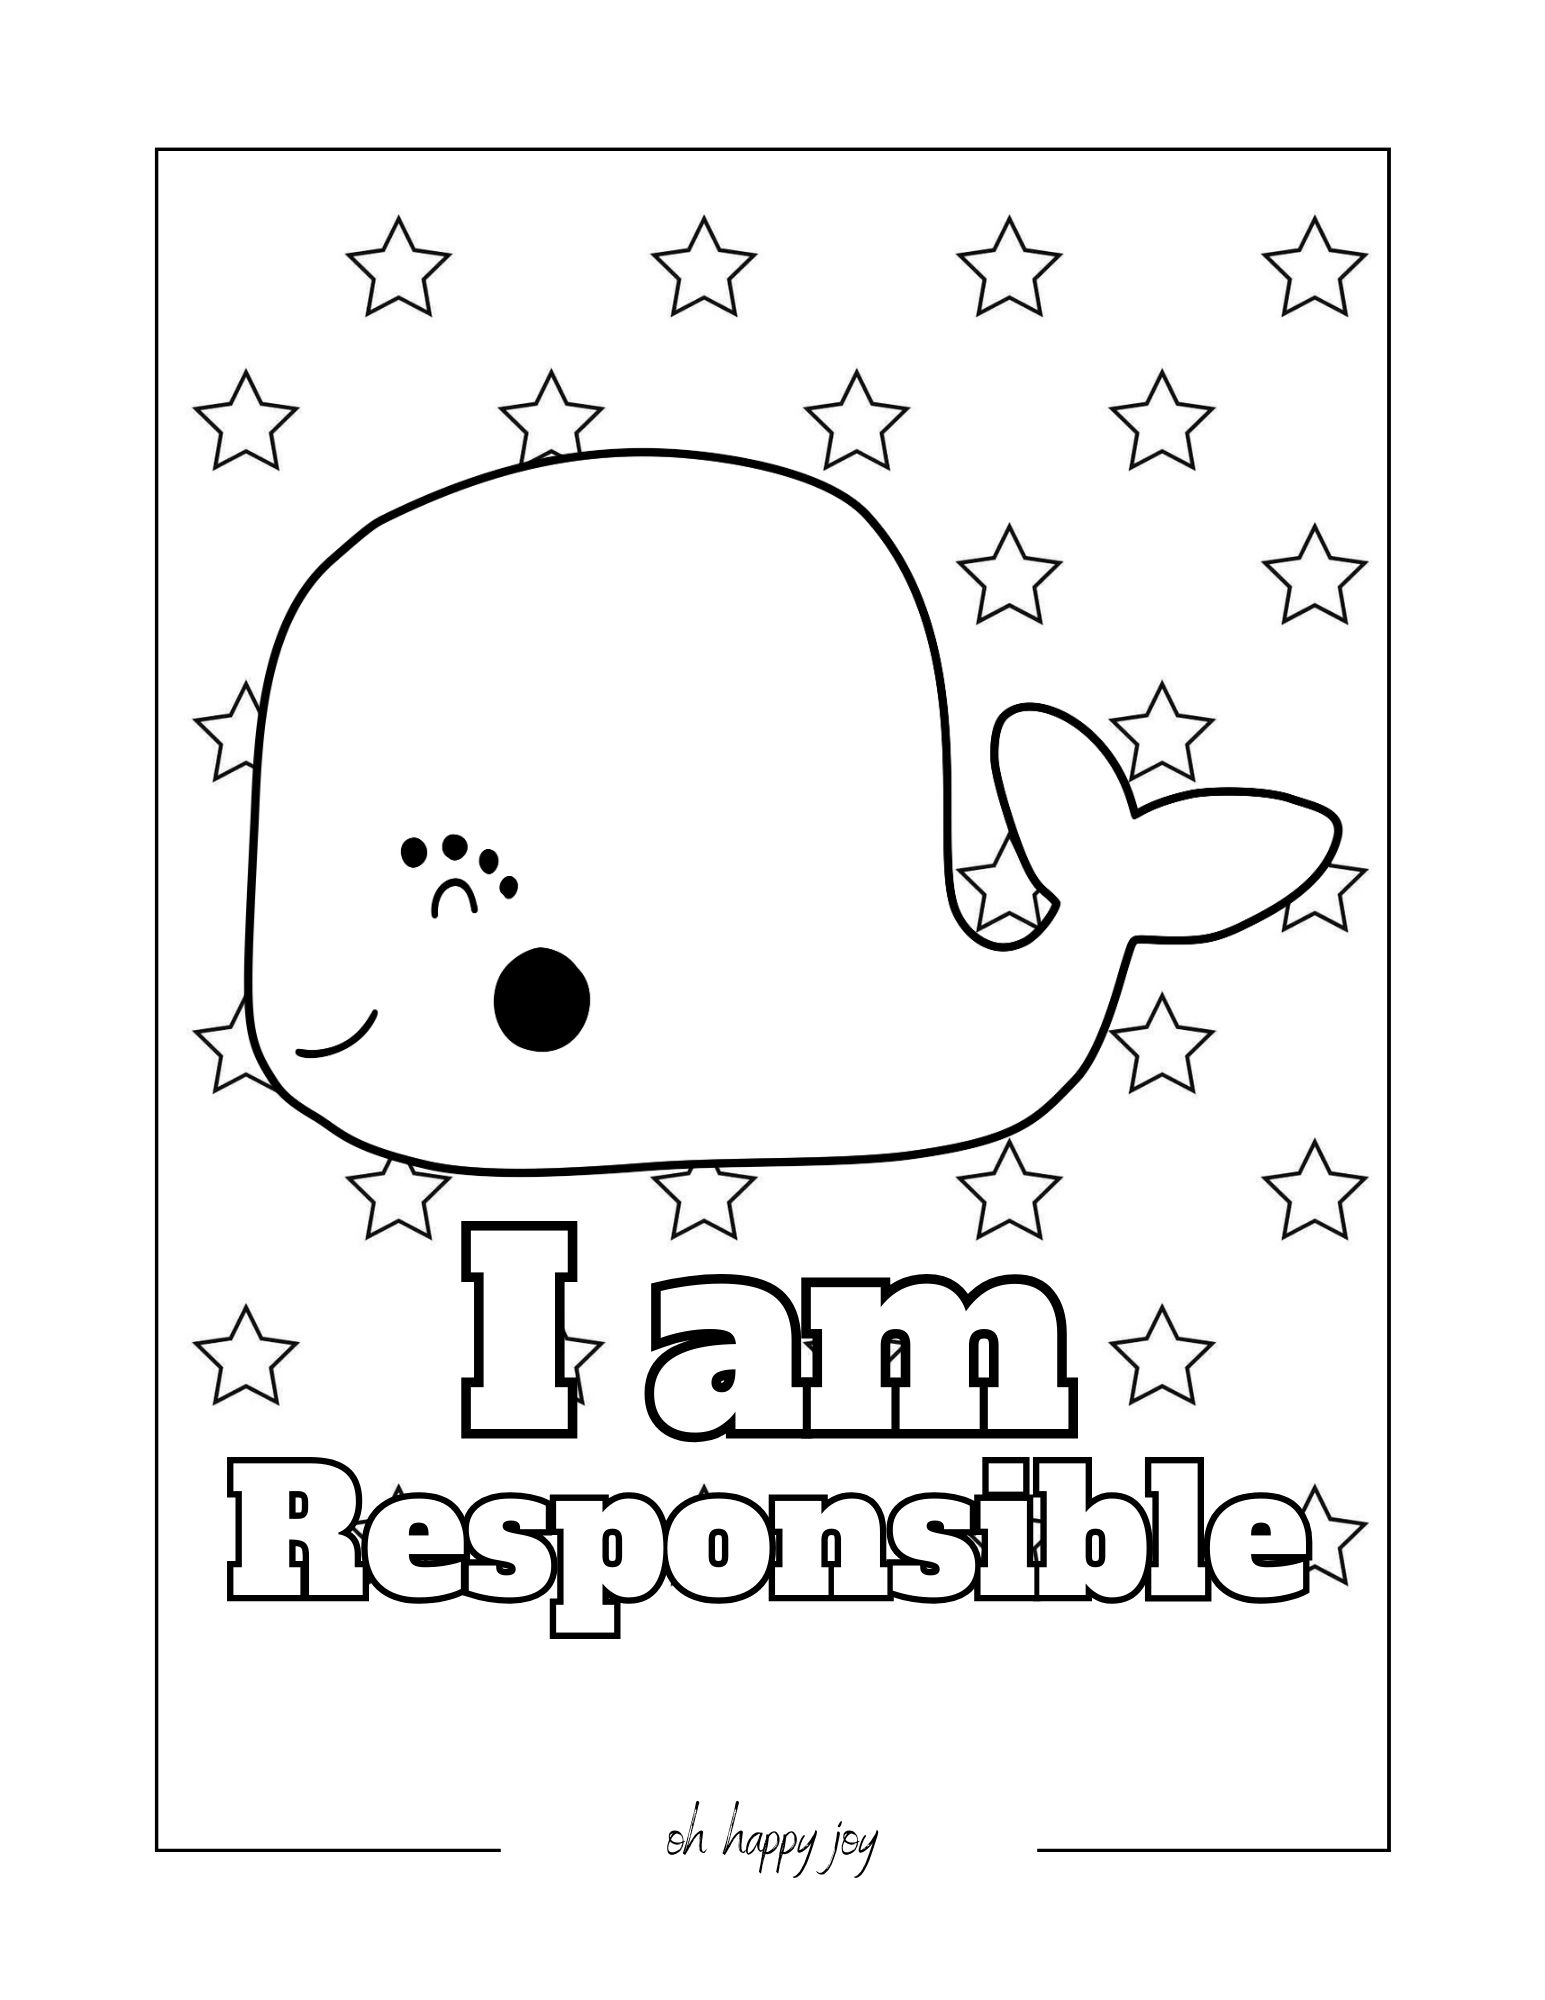 I am responsible affirmation coloring page